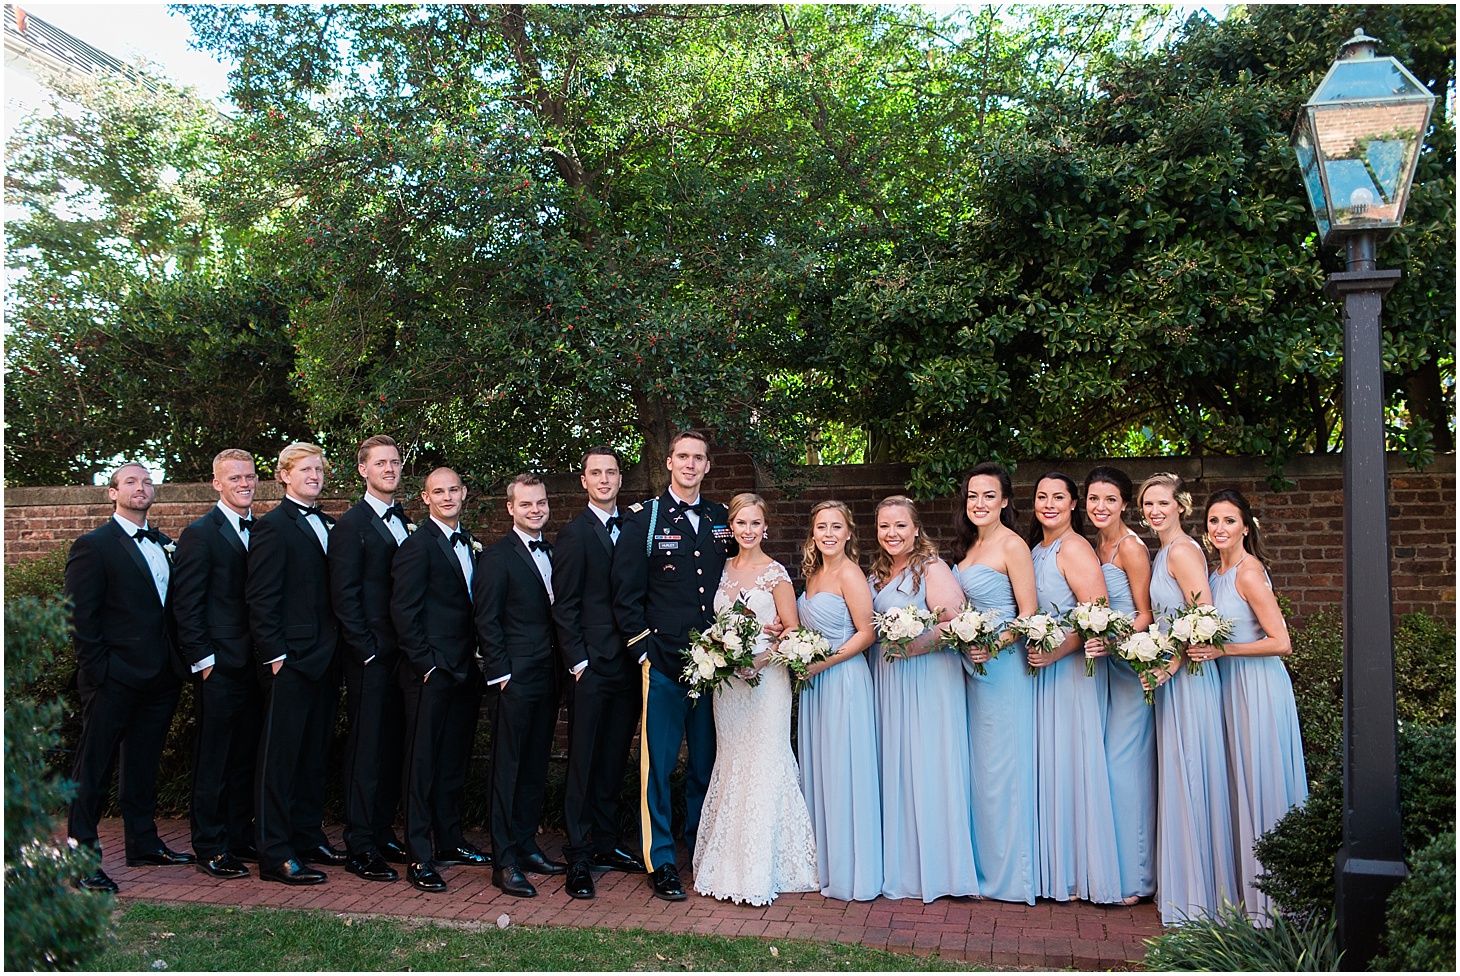 Bridal Party at Old Presbyterian Meeting House | Southern Black Tie wedding at St. Regis DC in Dusty Blue and Ivory | Sarah Bradshaw Photography